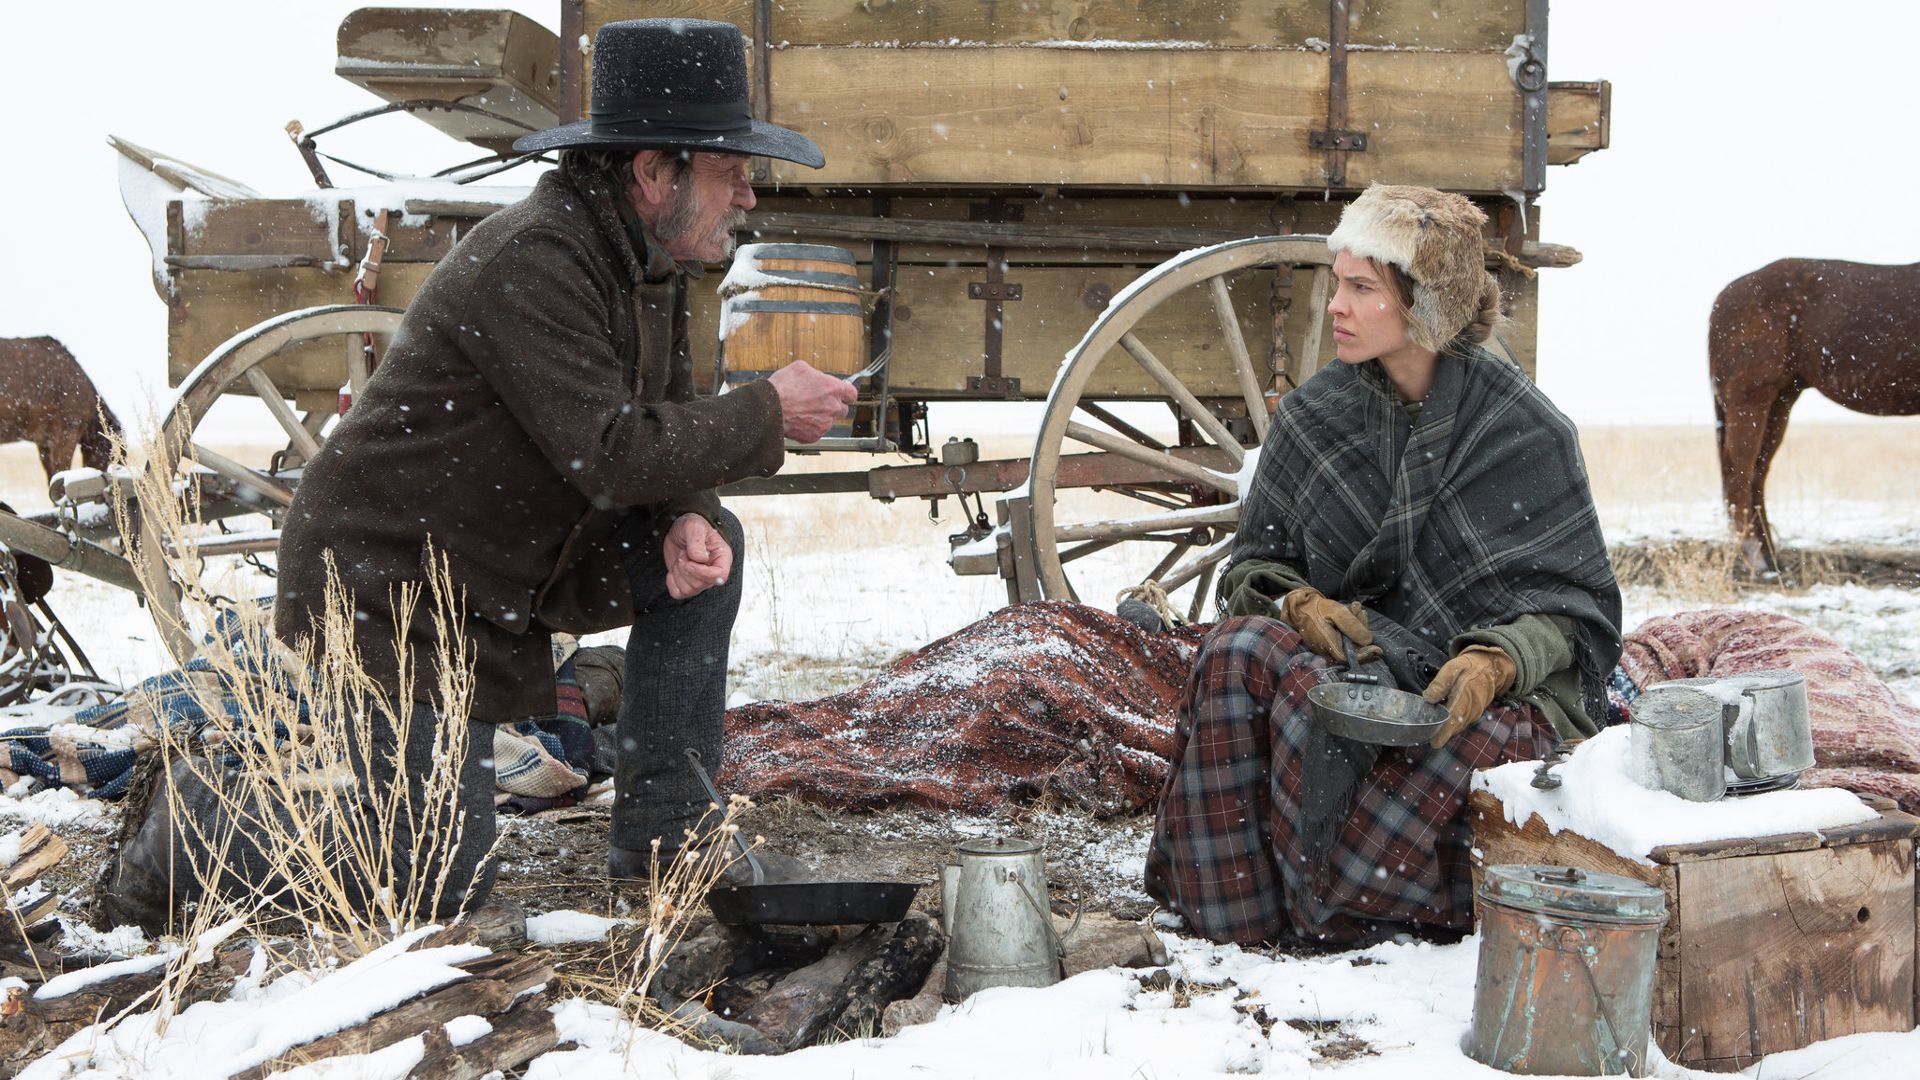 George and Mary face off in the snow in The Homesman